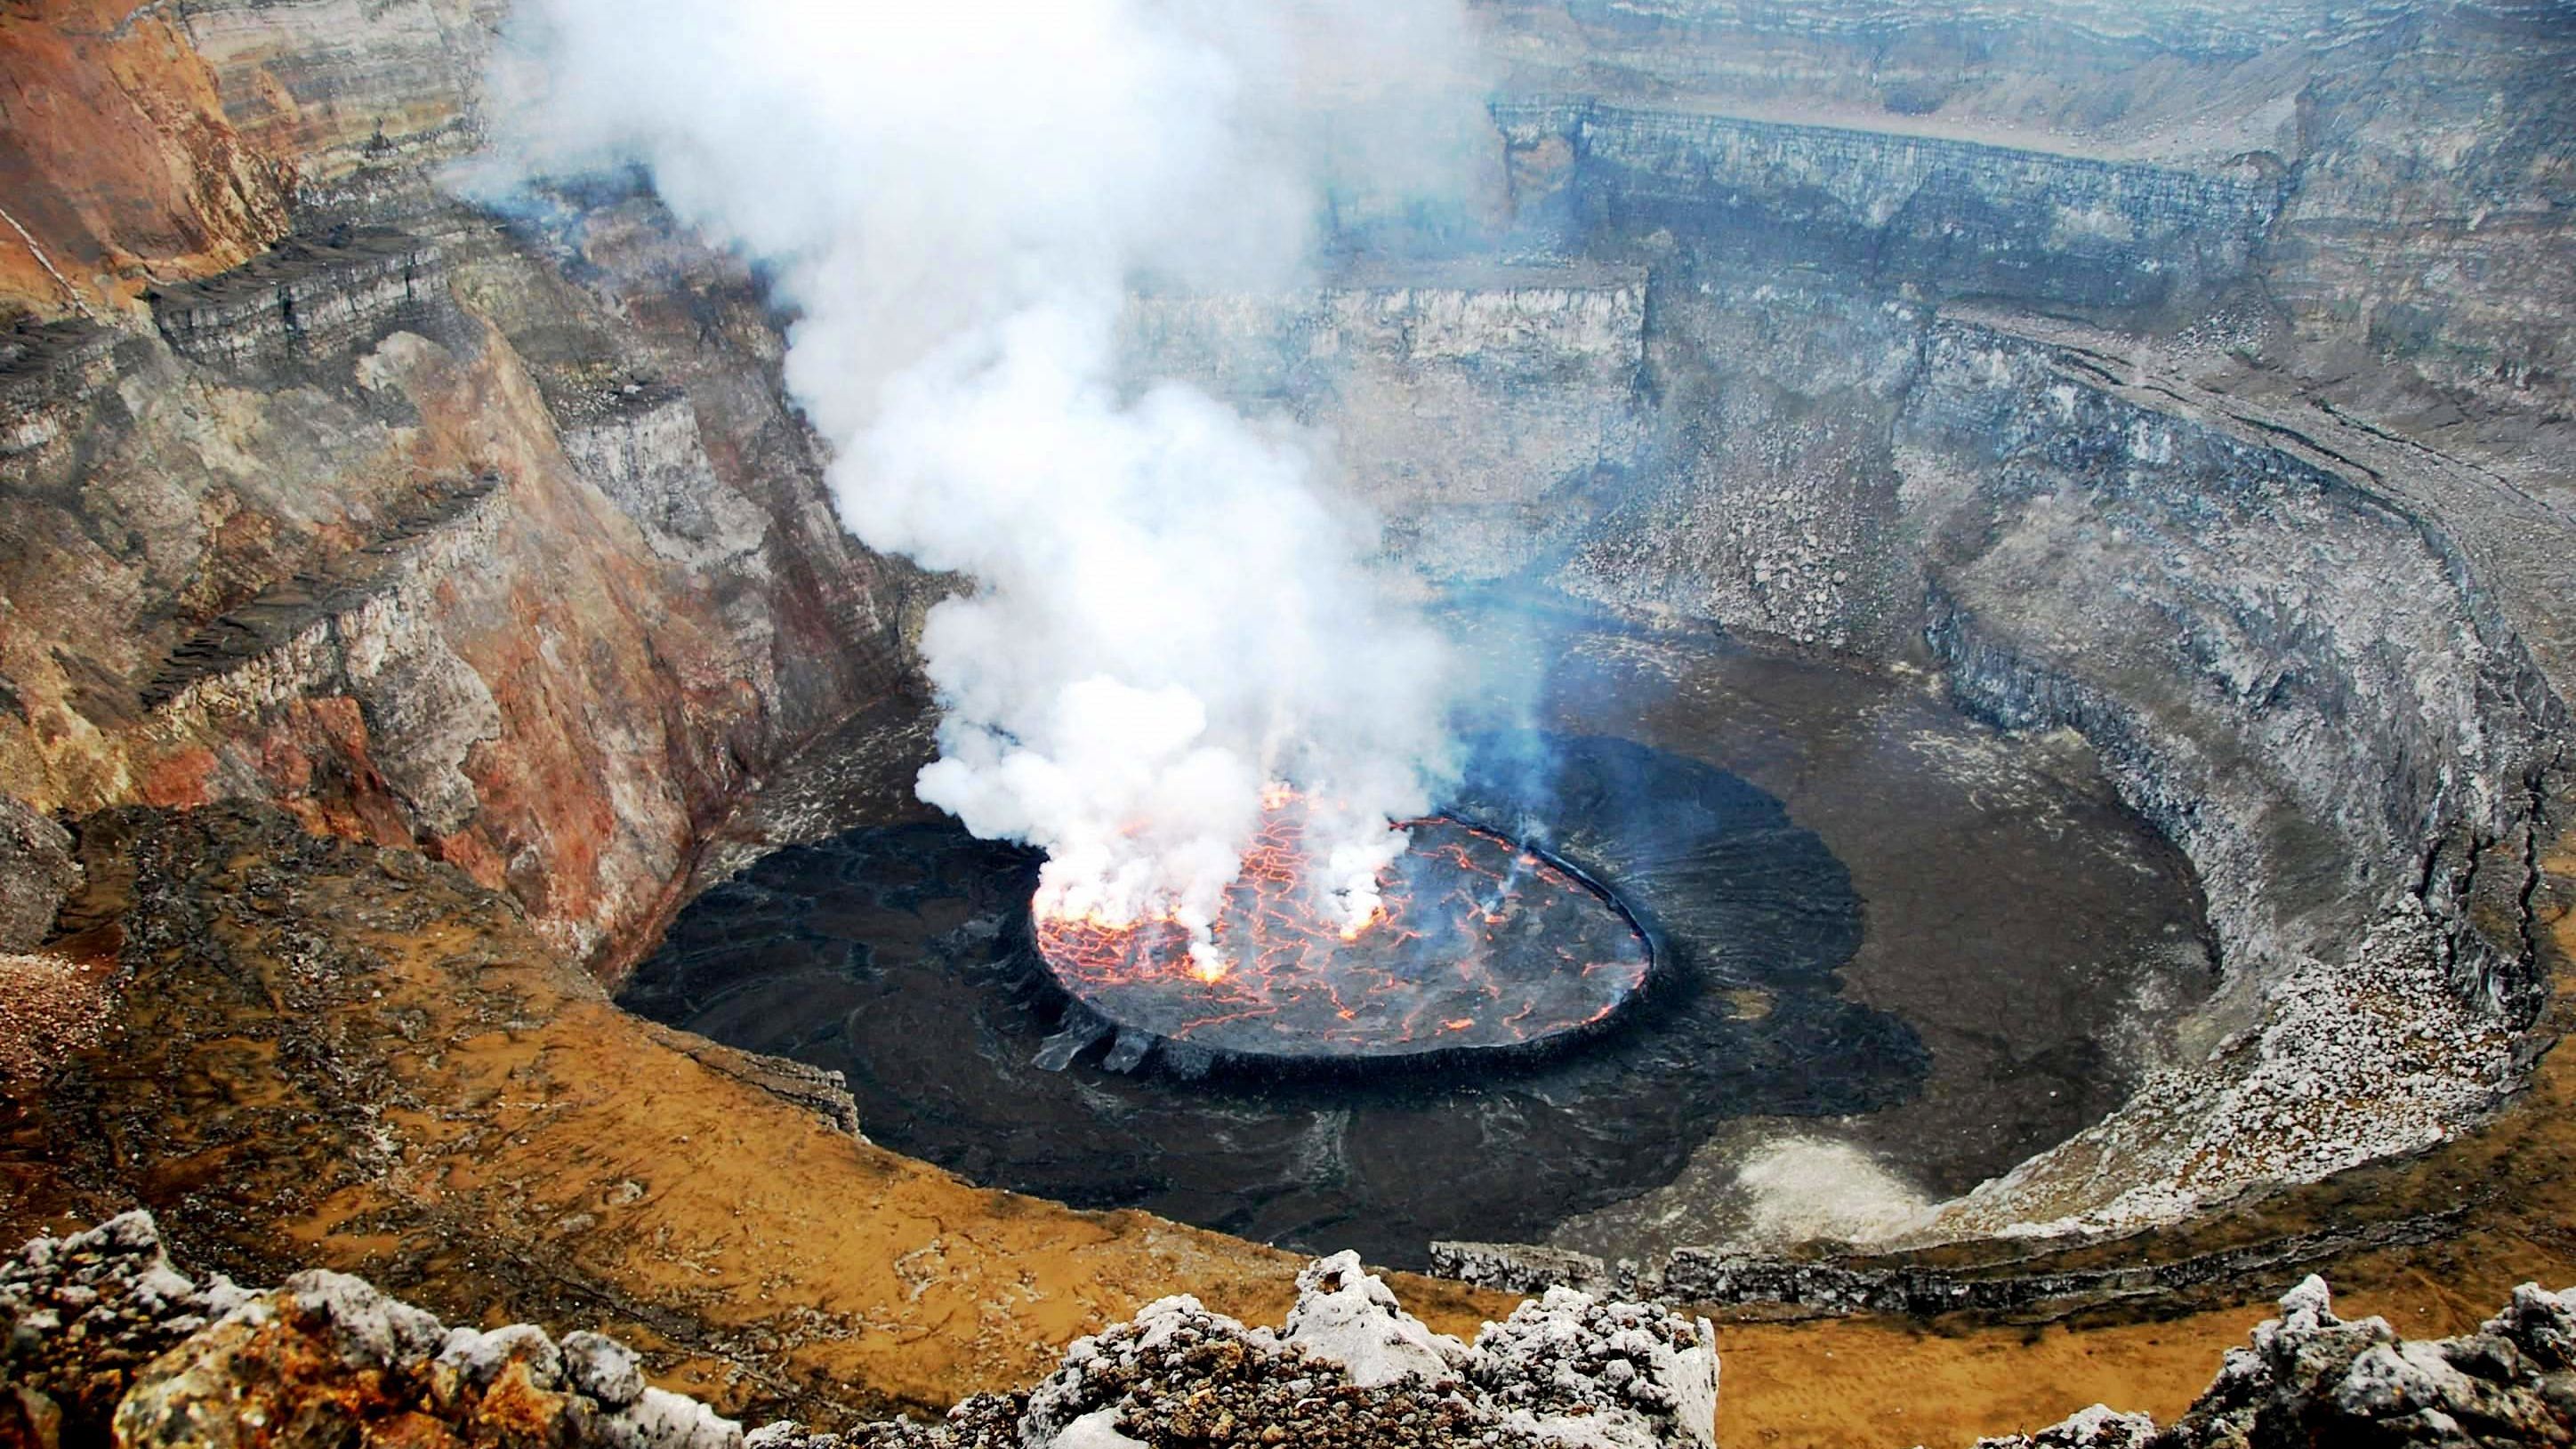 The Virunga National Park is home to the world's largest lava lake, a 250-meter wide cauldron of steam and smoke. 